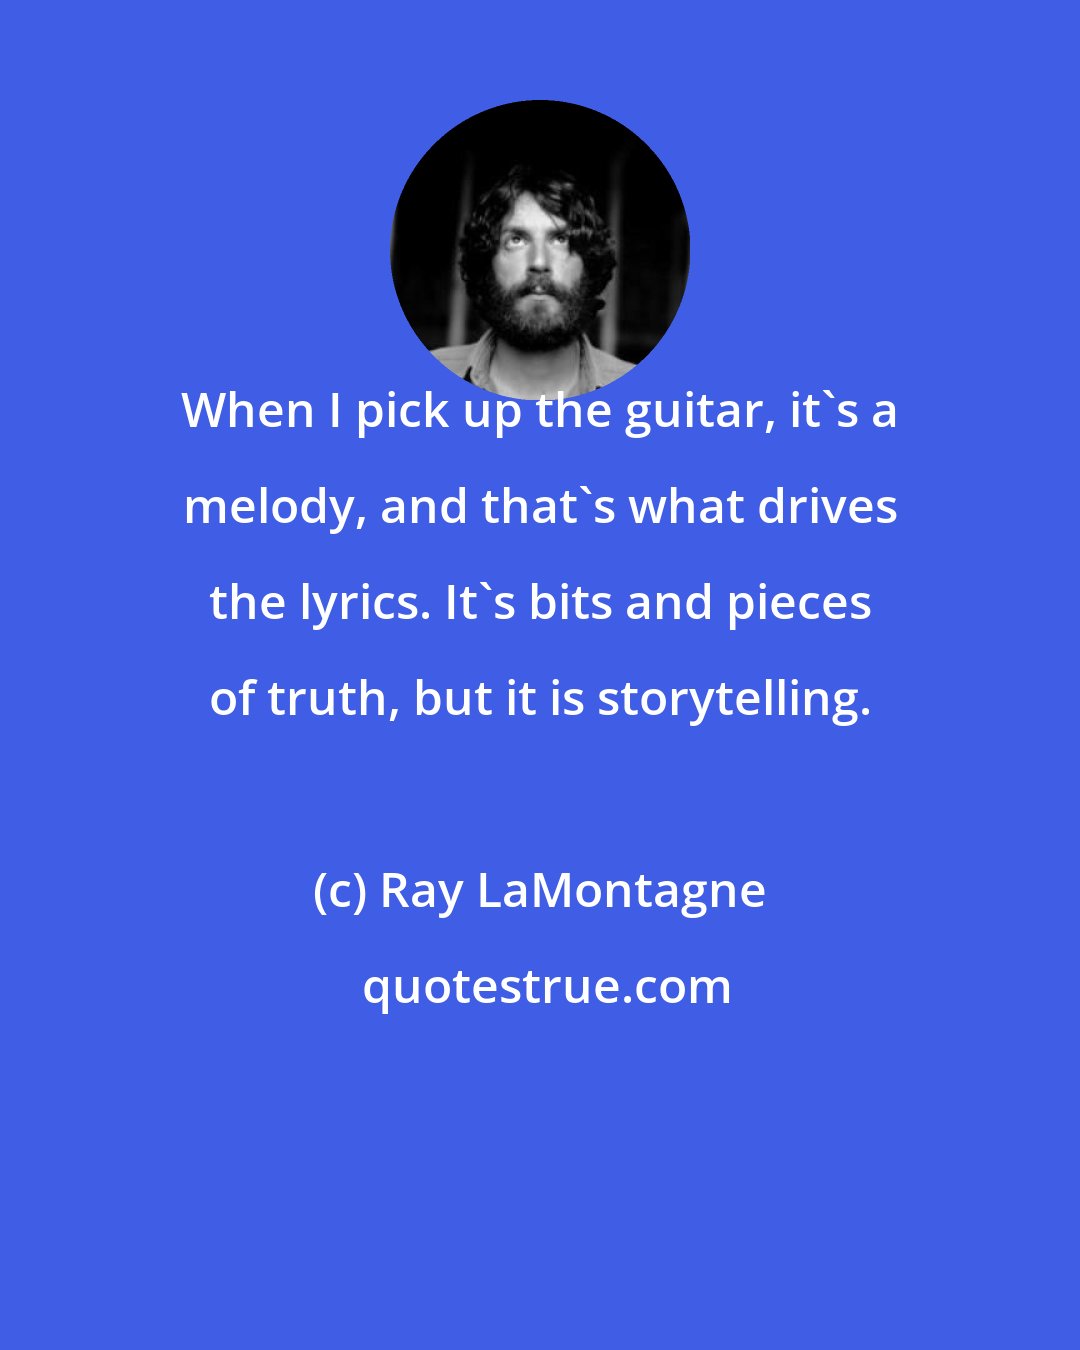 Ray LaMontagne: When I pick up the guitar, it's a melody, and that's what drives the lyrics. It's bits and pieces of truth, but it is storytelling.